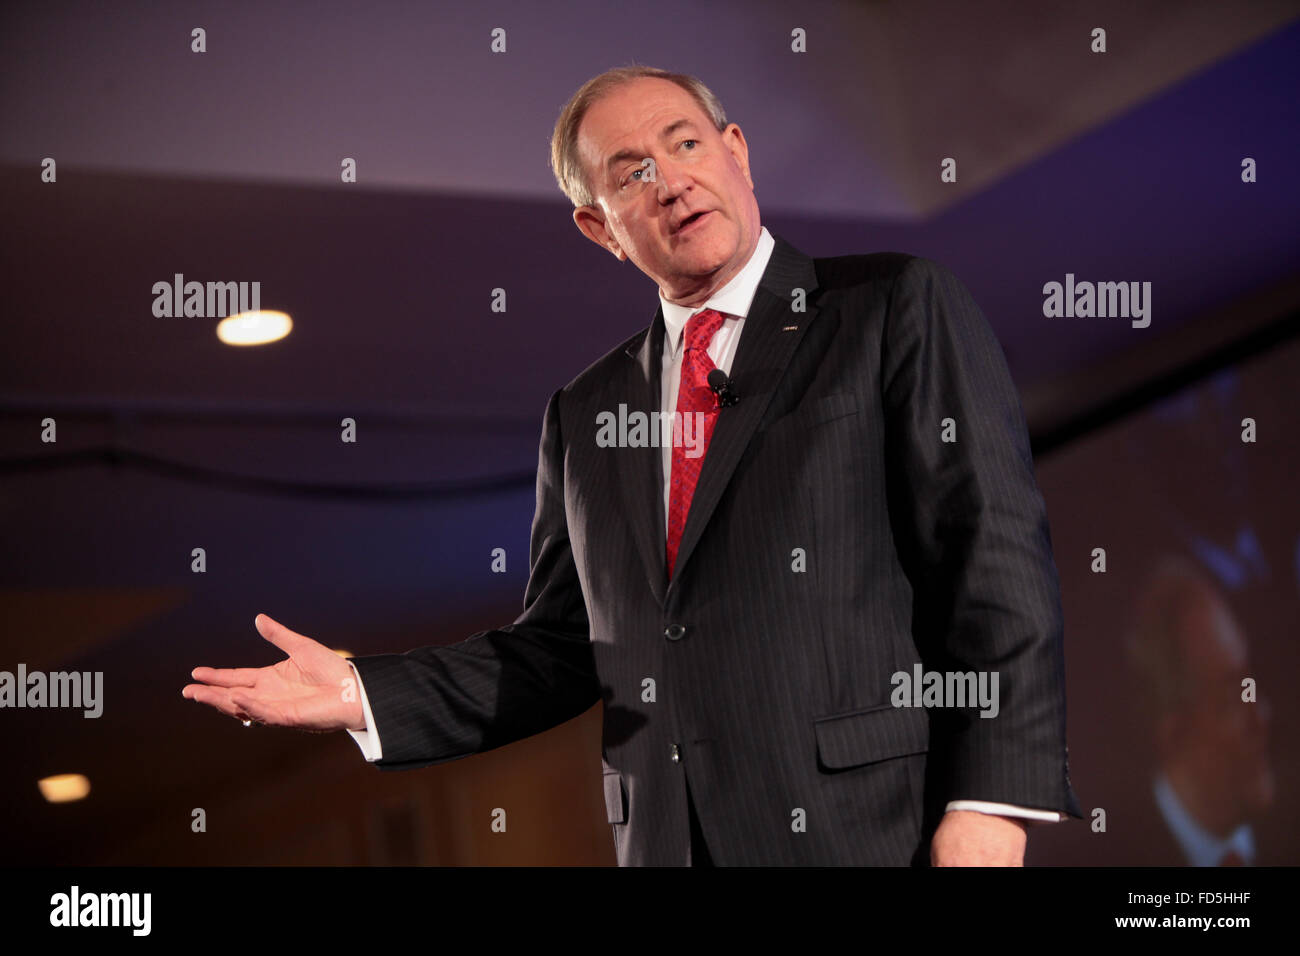 Former Virginia Governor and GOP presidential candidate Jim Gilmore speaks at the First in the Nation Town Hall hosted by the New Hampshire Republican Party January 23, 2016 in Nashua, New Hampshire. Stock Photo